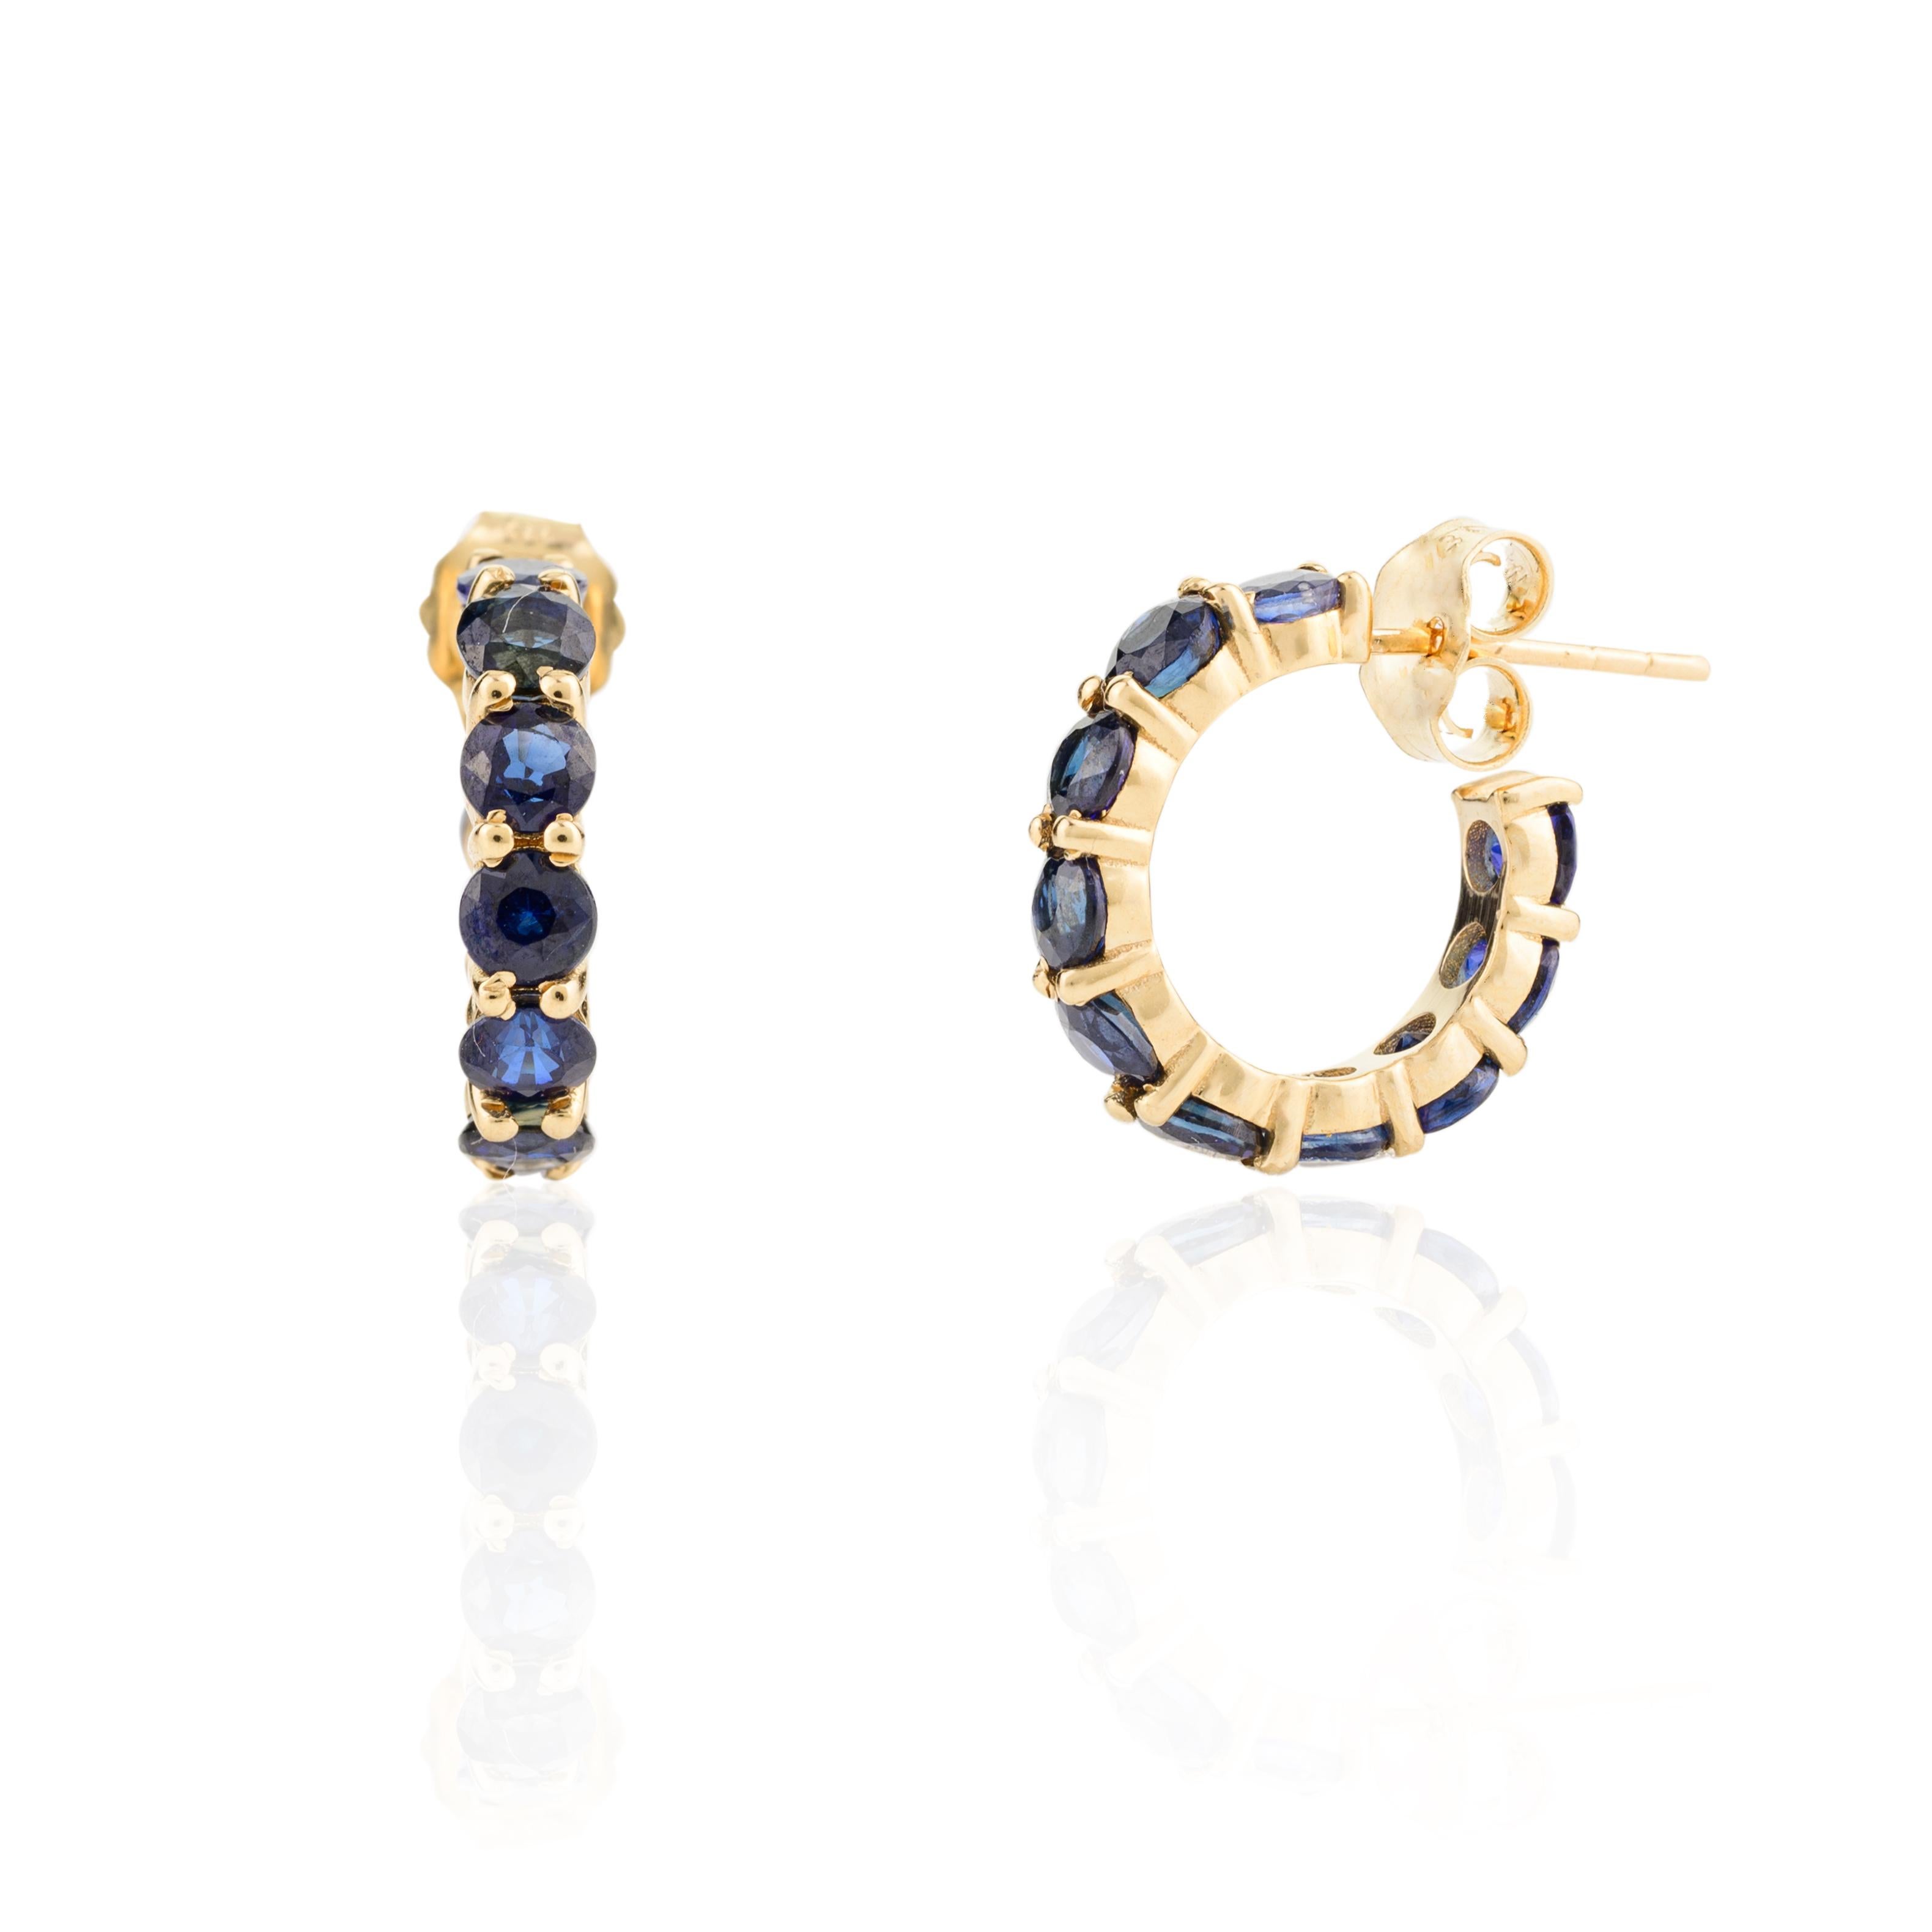 Handcrafted Dainty Blue Sapphire Huggie Hoop Earrings in 18k Solid Yellow Gold For Sale 2